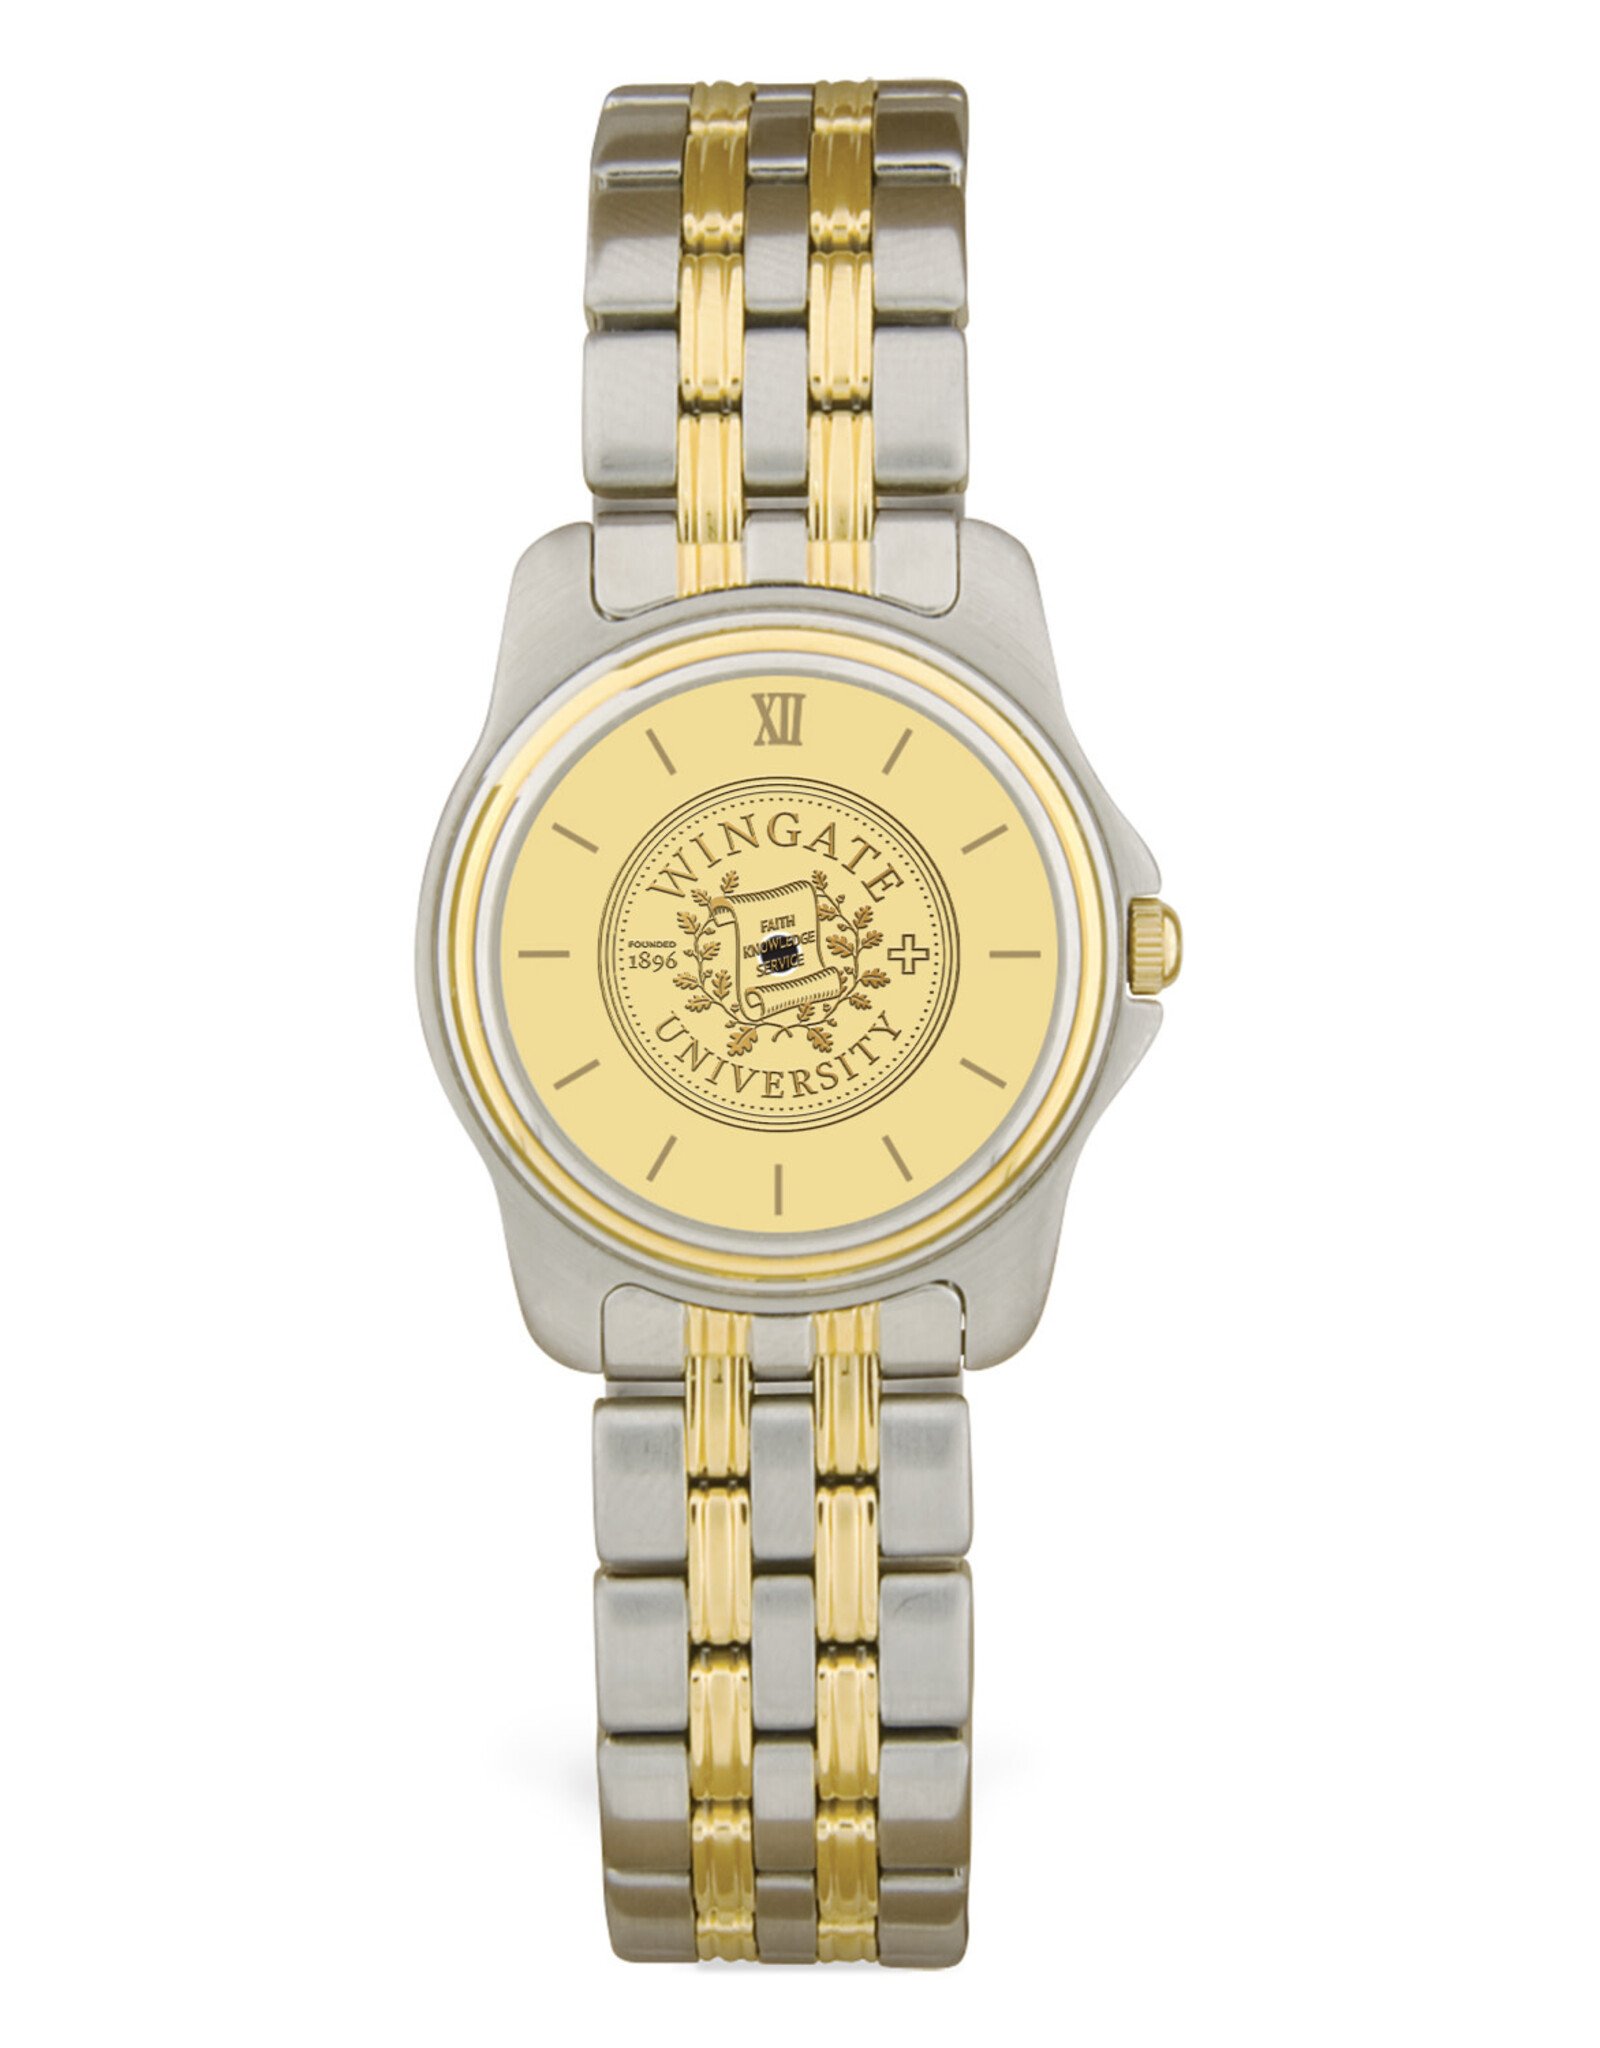 DROP SHIP ONLY Ladies' Two-tone Wristwatch with Gold Wingate Seal Face (ONLINE ONLY)